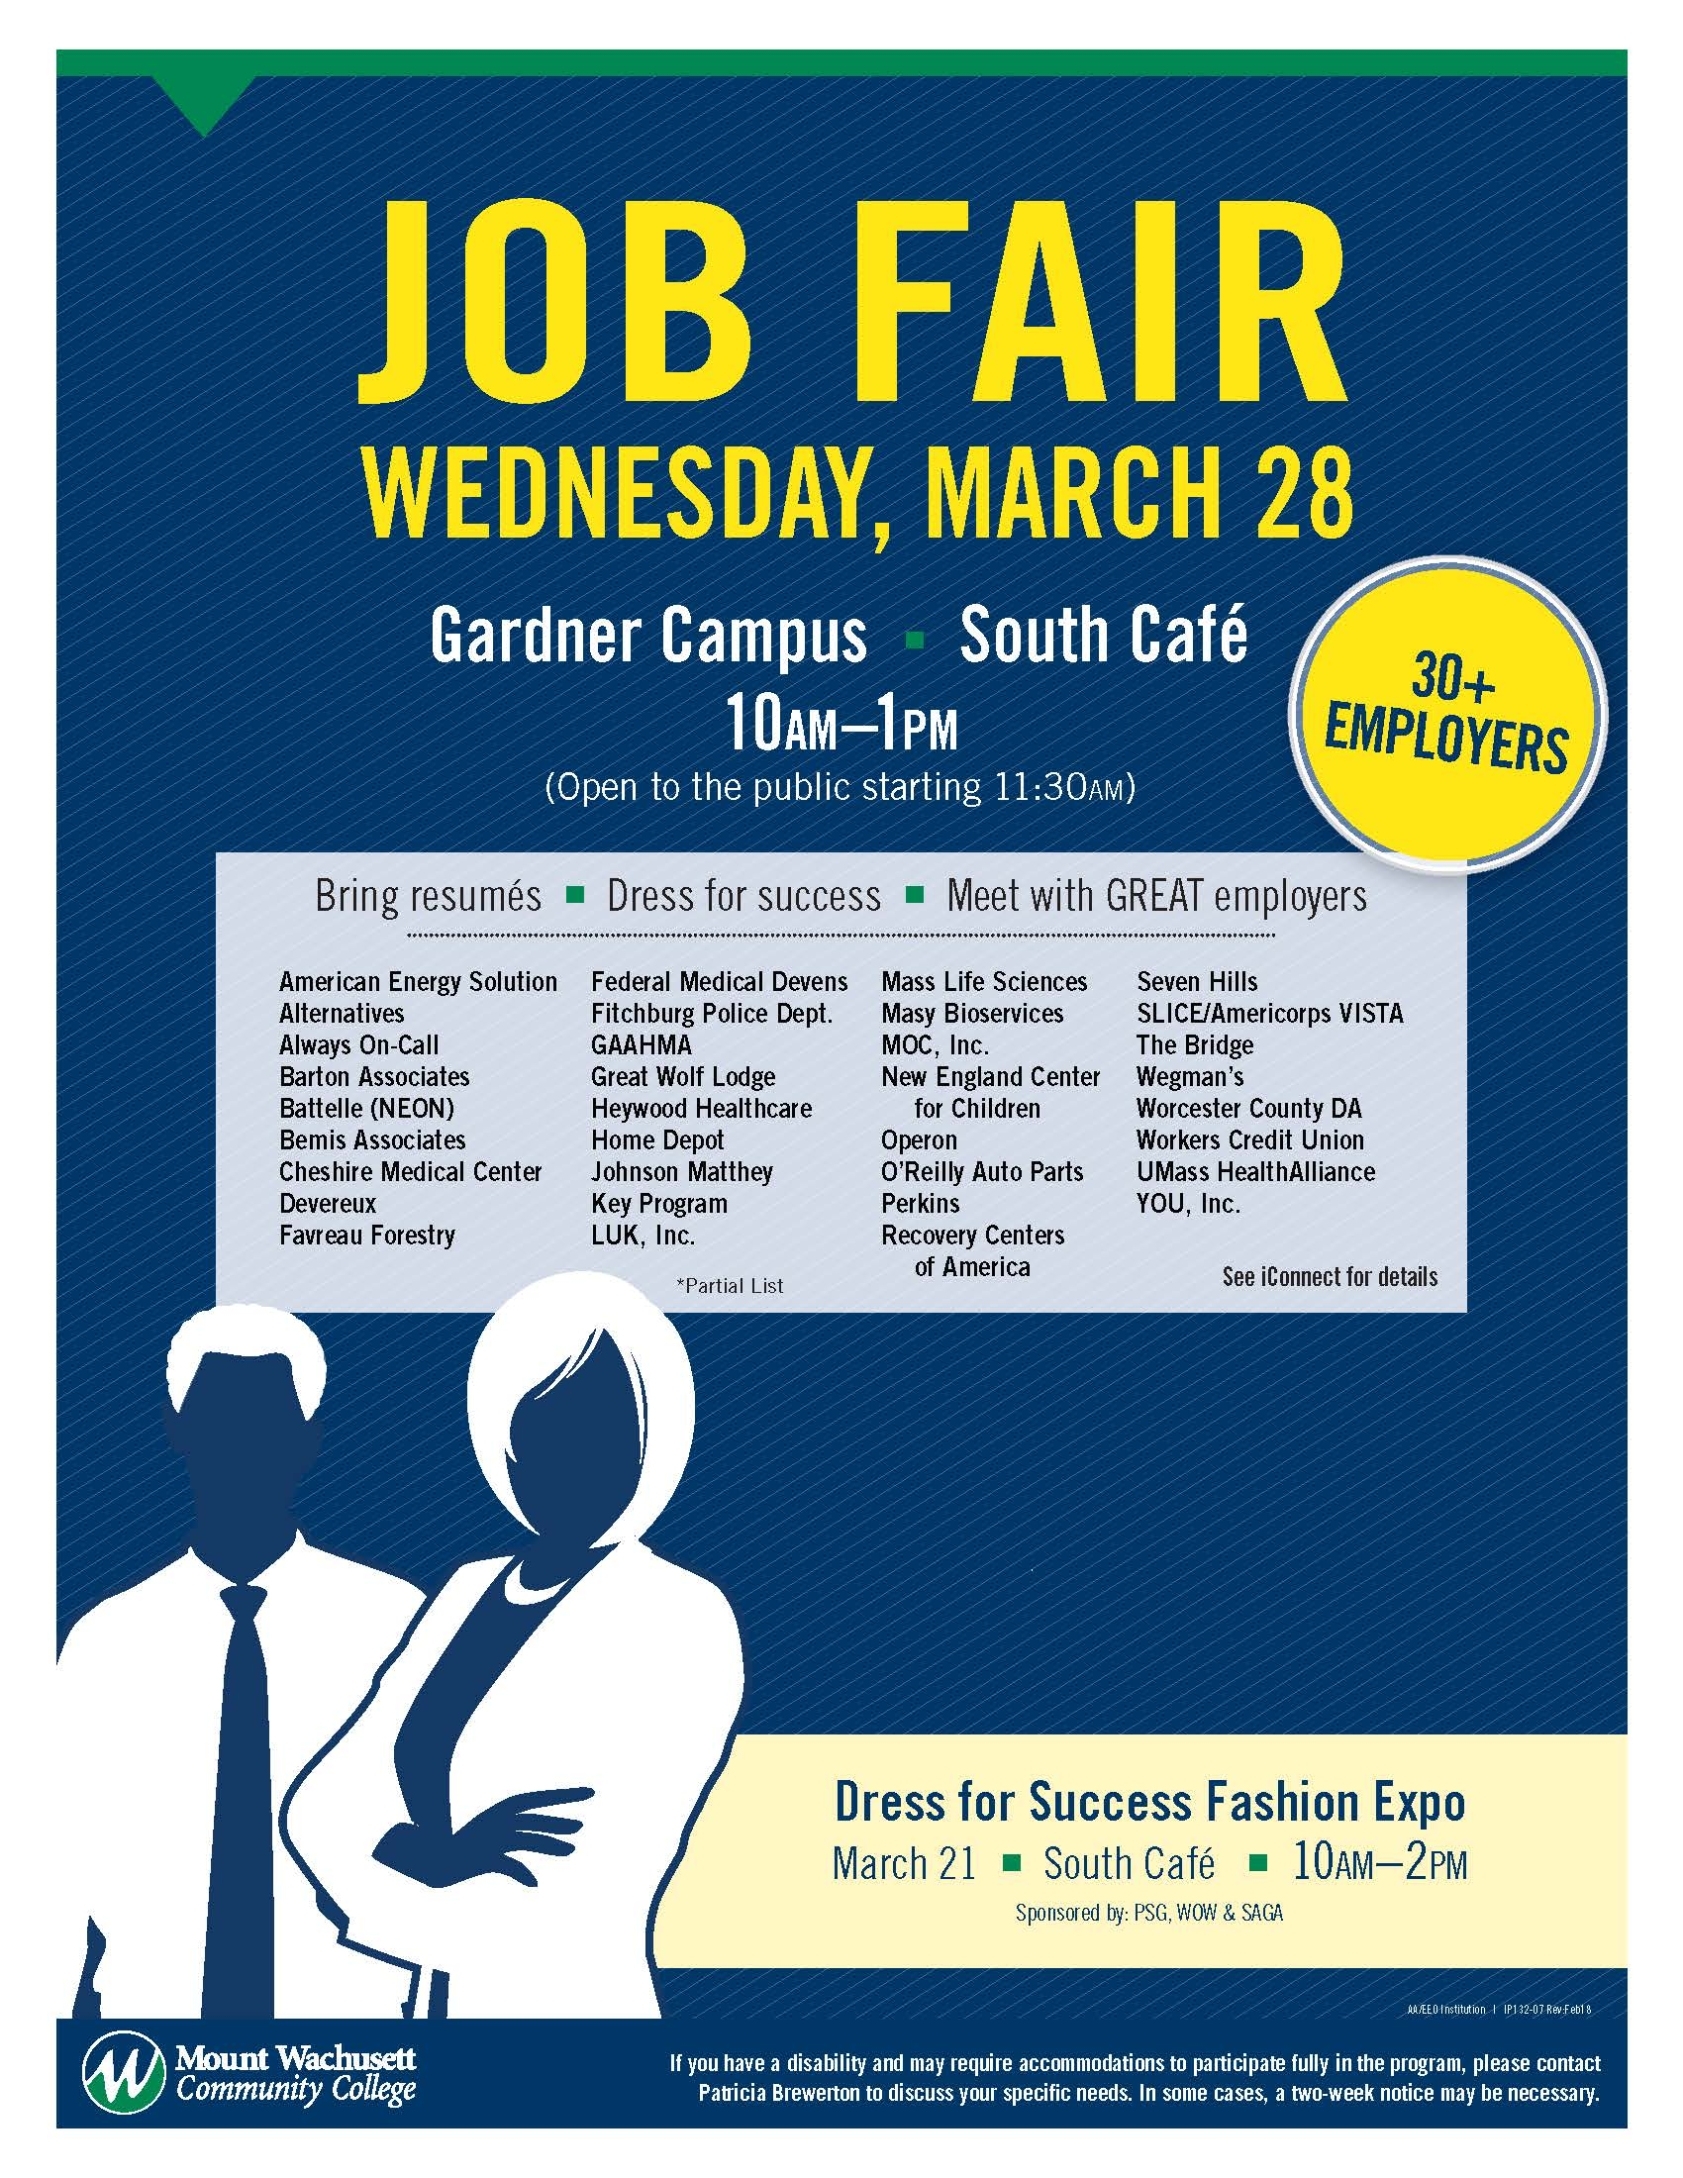 Job Fair To Bring Over 30 Employers To Mwcc — Mount Wachusett Community College Pertaining To Job Fair Flyer Template